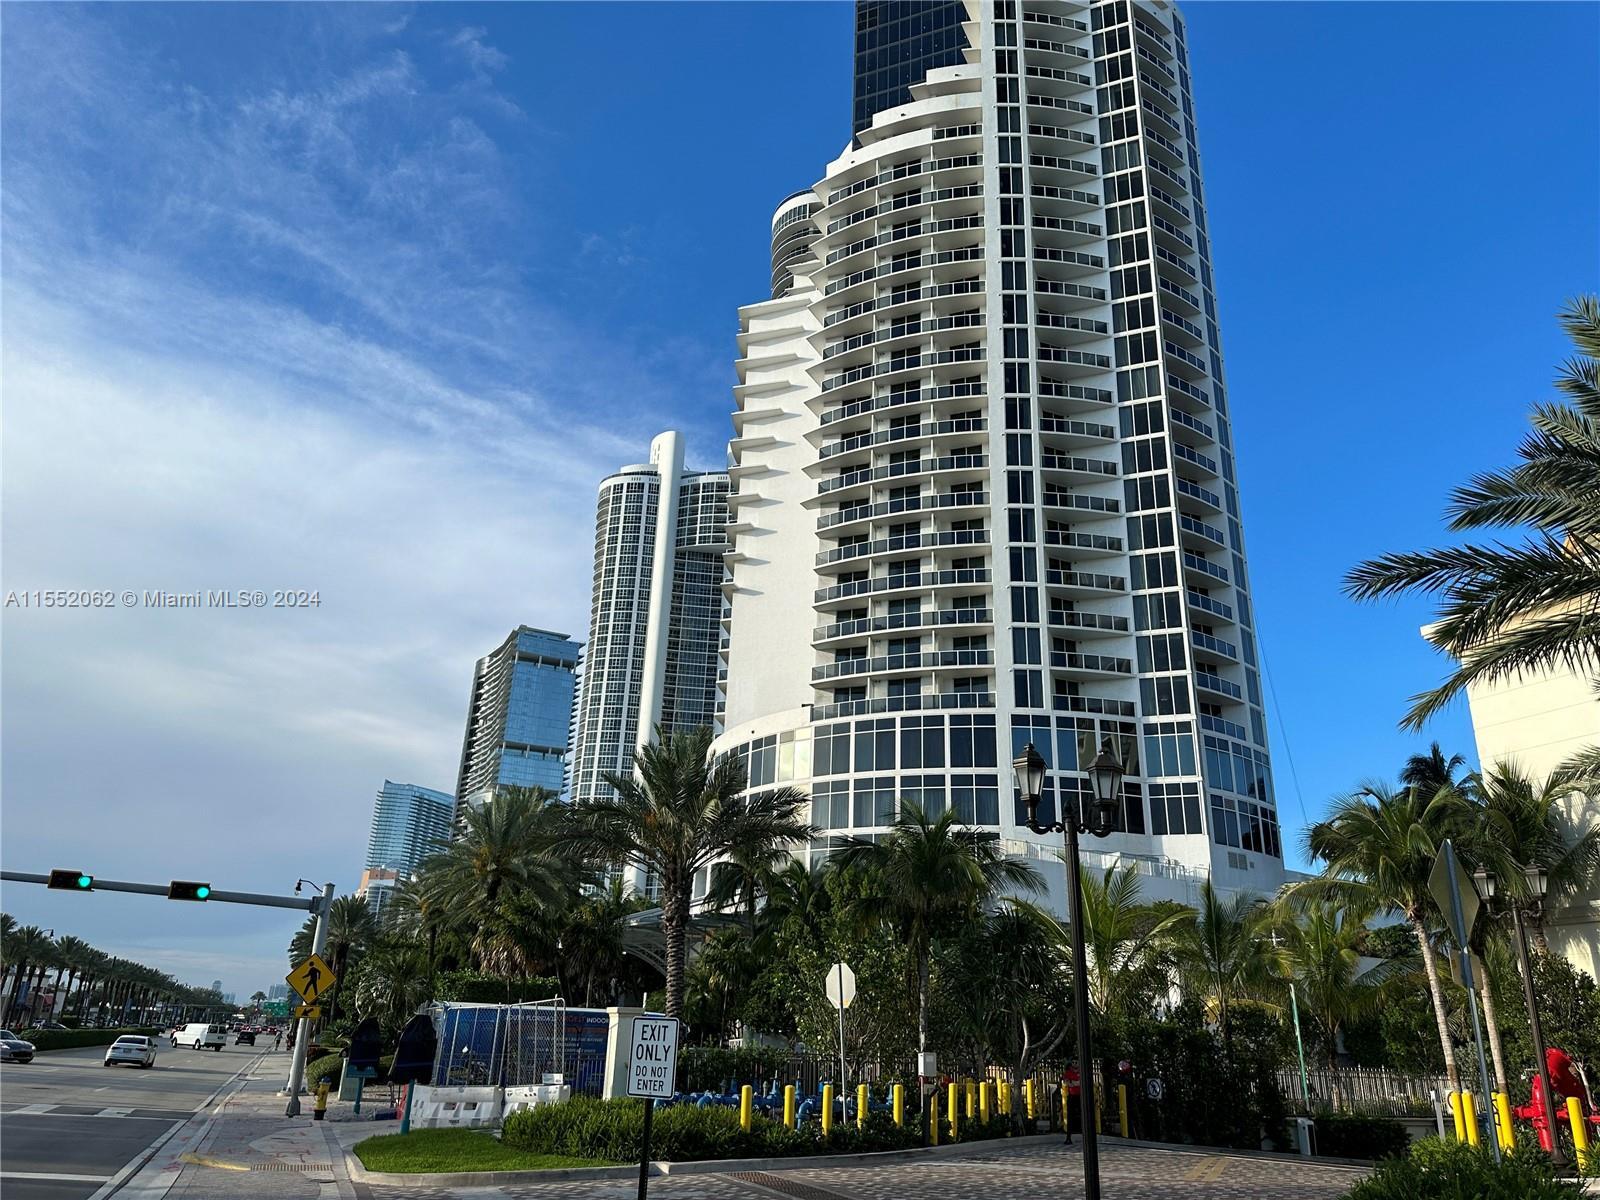 LUXURY TRUMP INTERNATIONAL BEACH RESORT PROVIDES AN OWNER INVESTMENT OPPORTUNITY. UNIT IS AT THE HOT